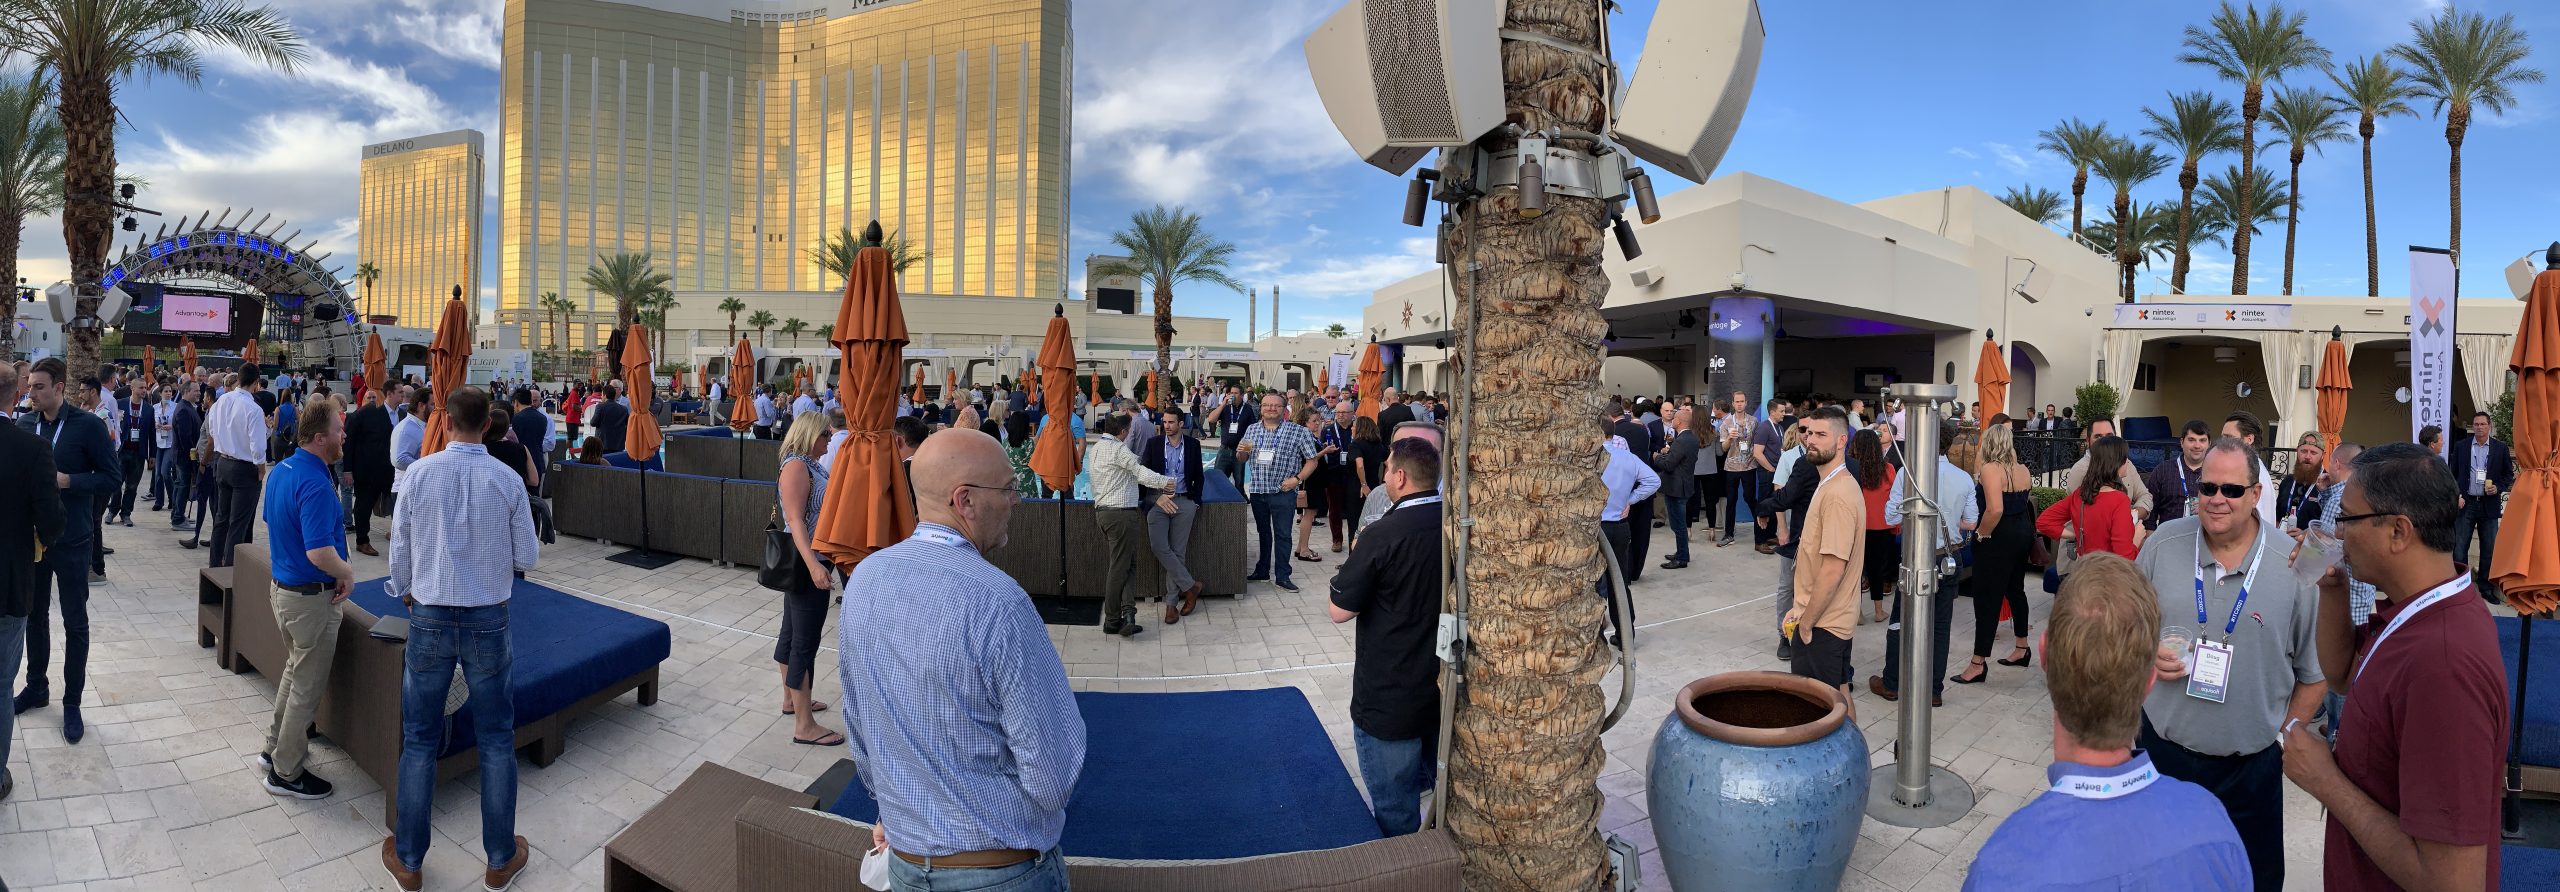 View of outdoors ITC Vegas 2021 conference